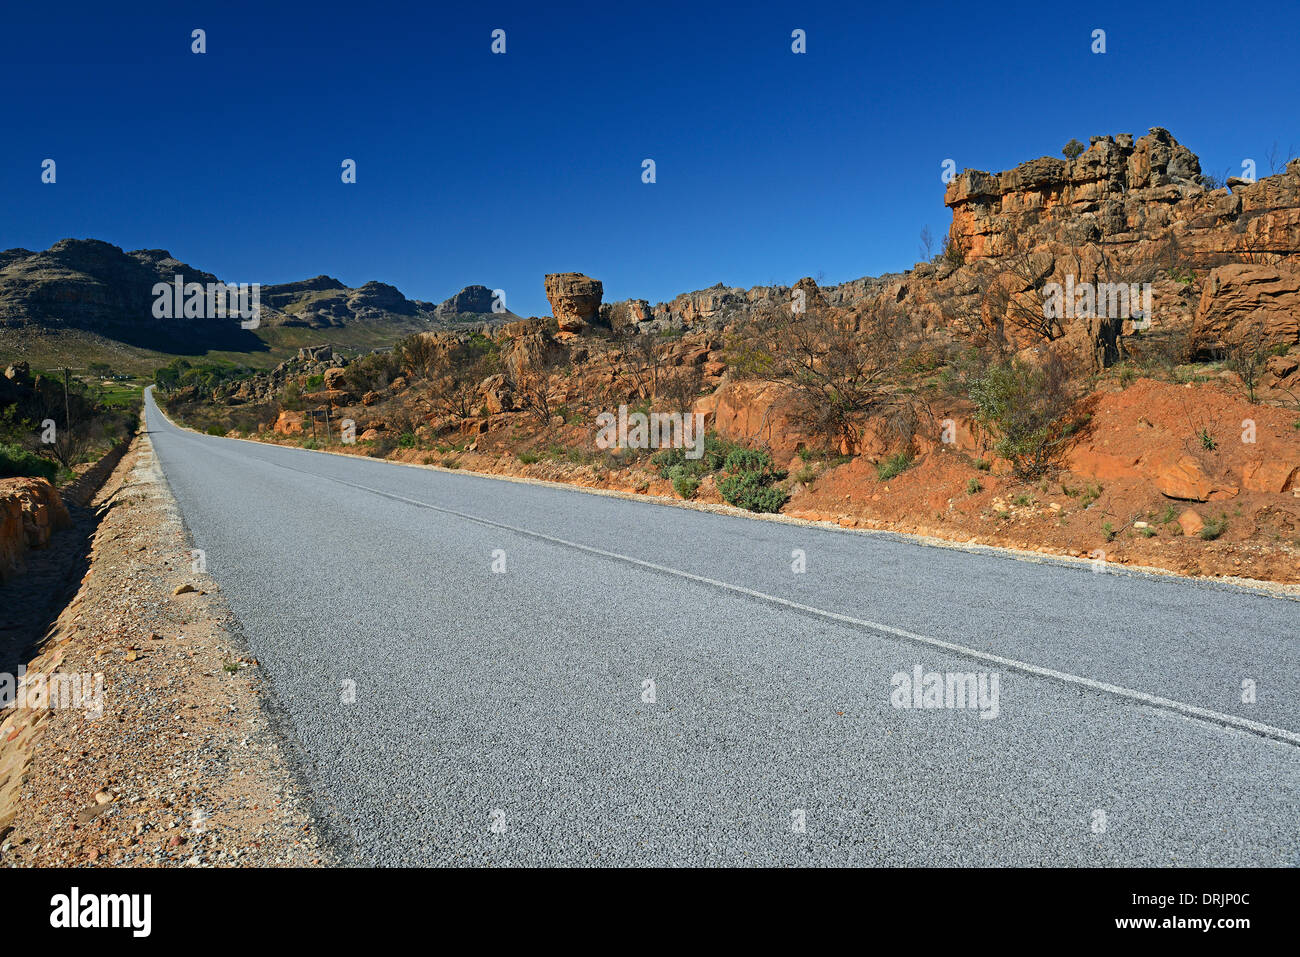 Street for the mountain Ceder Wilderness area with Clanwilliam, west cape, western cape, South Africa, Africa, Strasse durch die Stock Photo